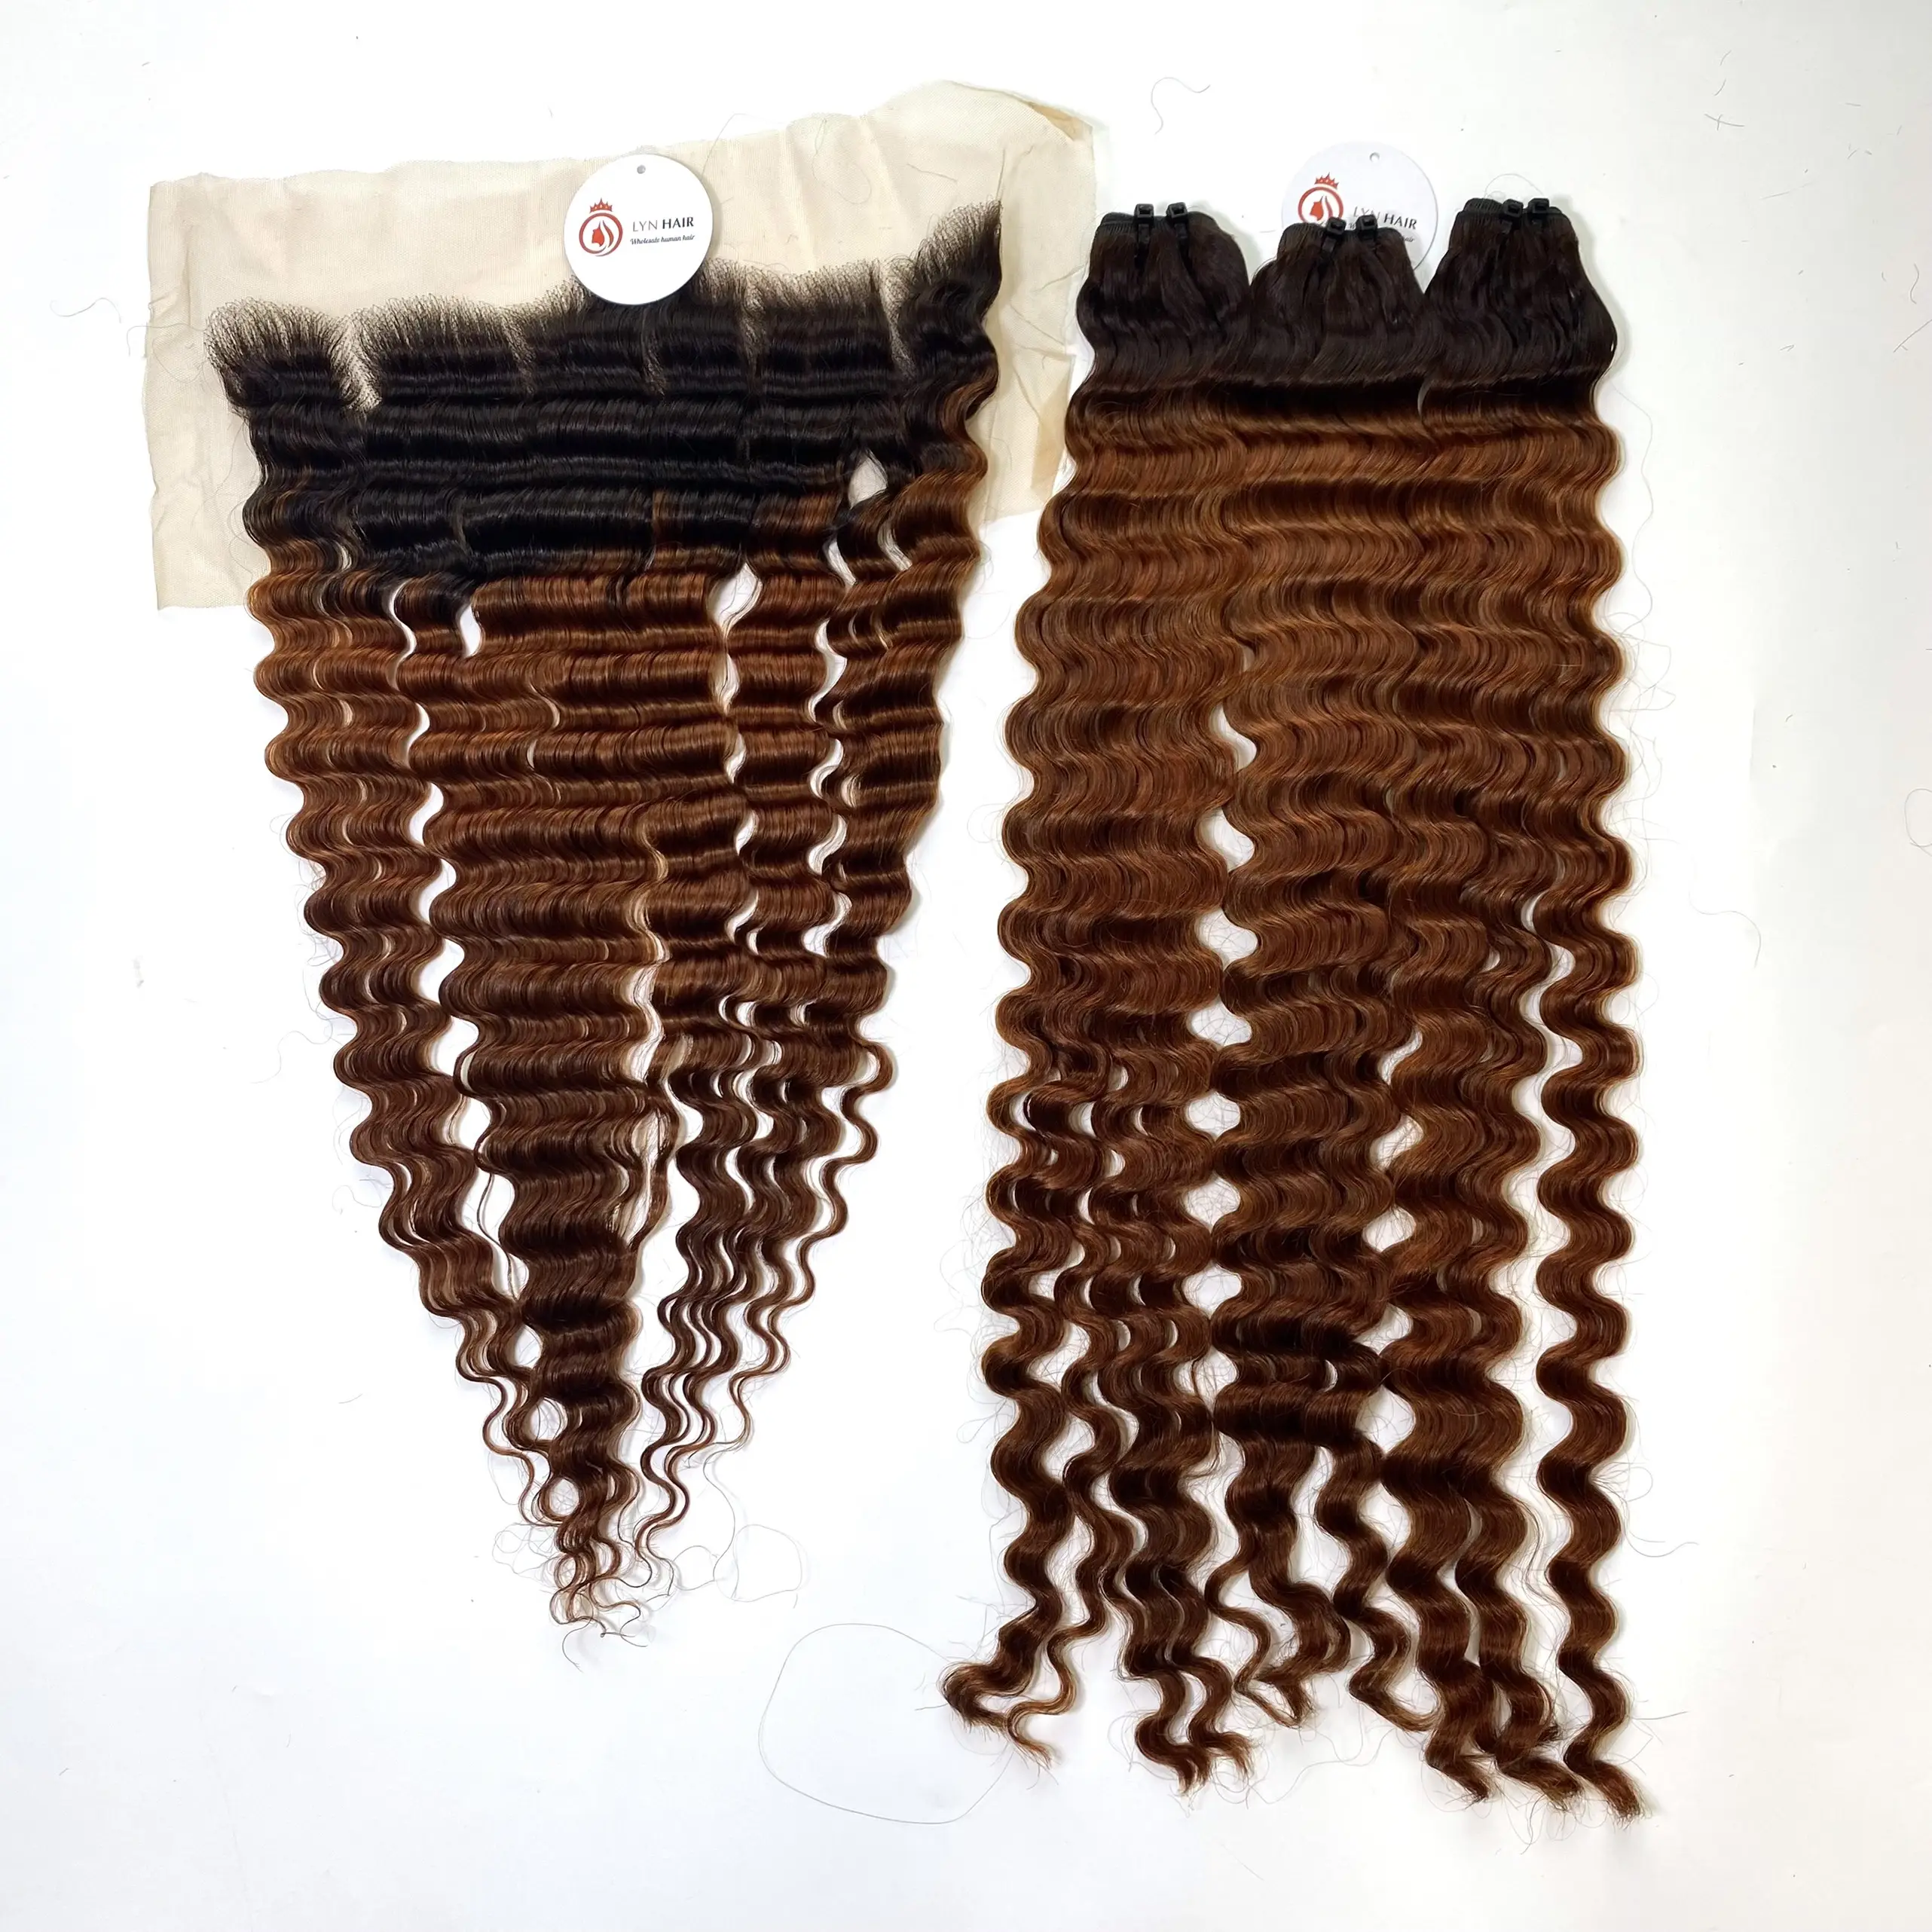 100% Raw Virgin Wavy Hair in Bundle, Vietnamese Wavy Hair, Curly Human Hair Extension Only Use Hot Steam No Chemical